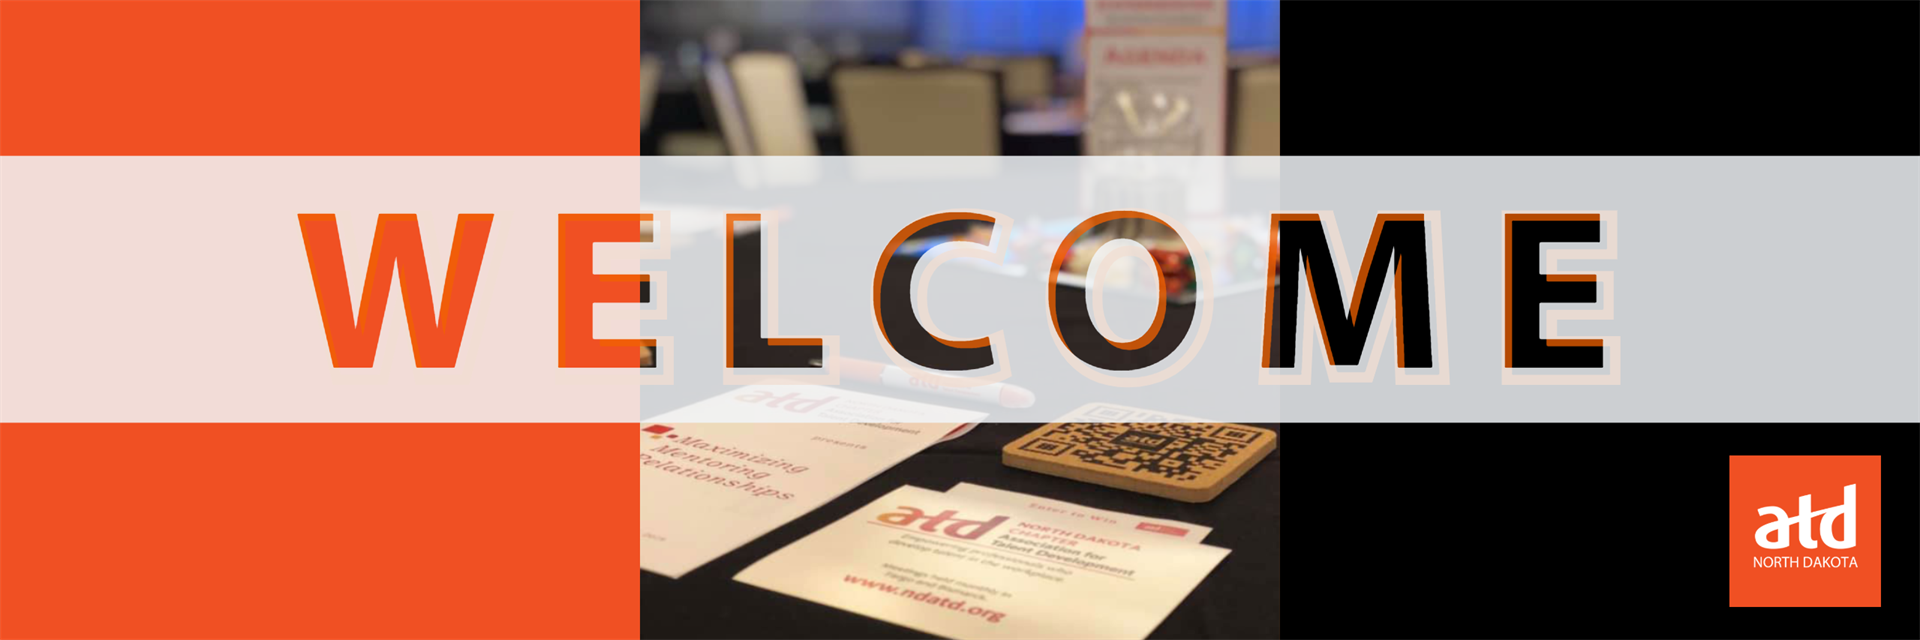 Header image with a table place setting at an NDATD event. The word Welcome is overlapping the image.